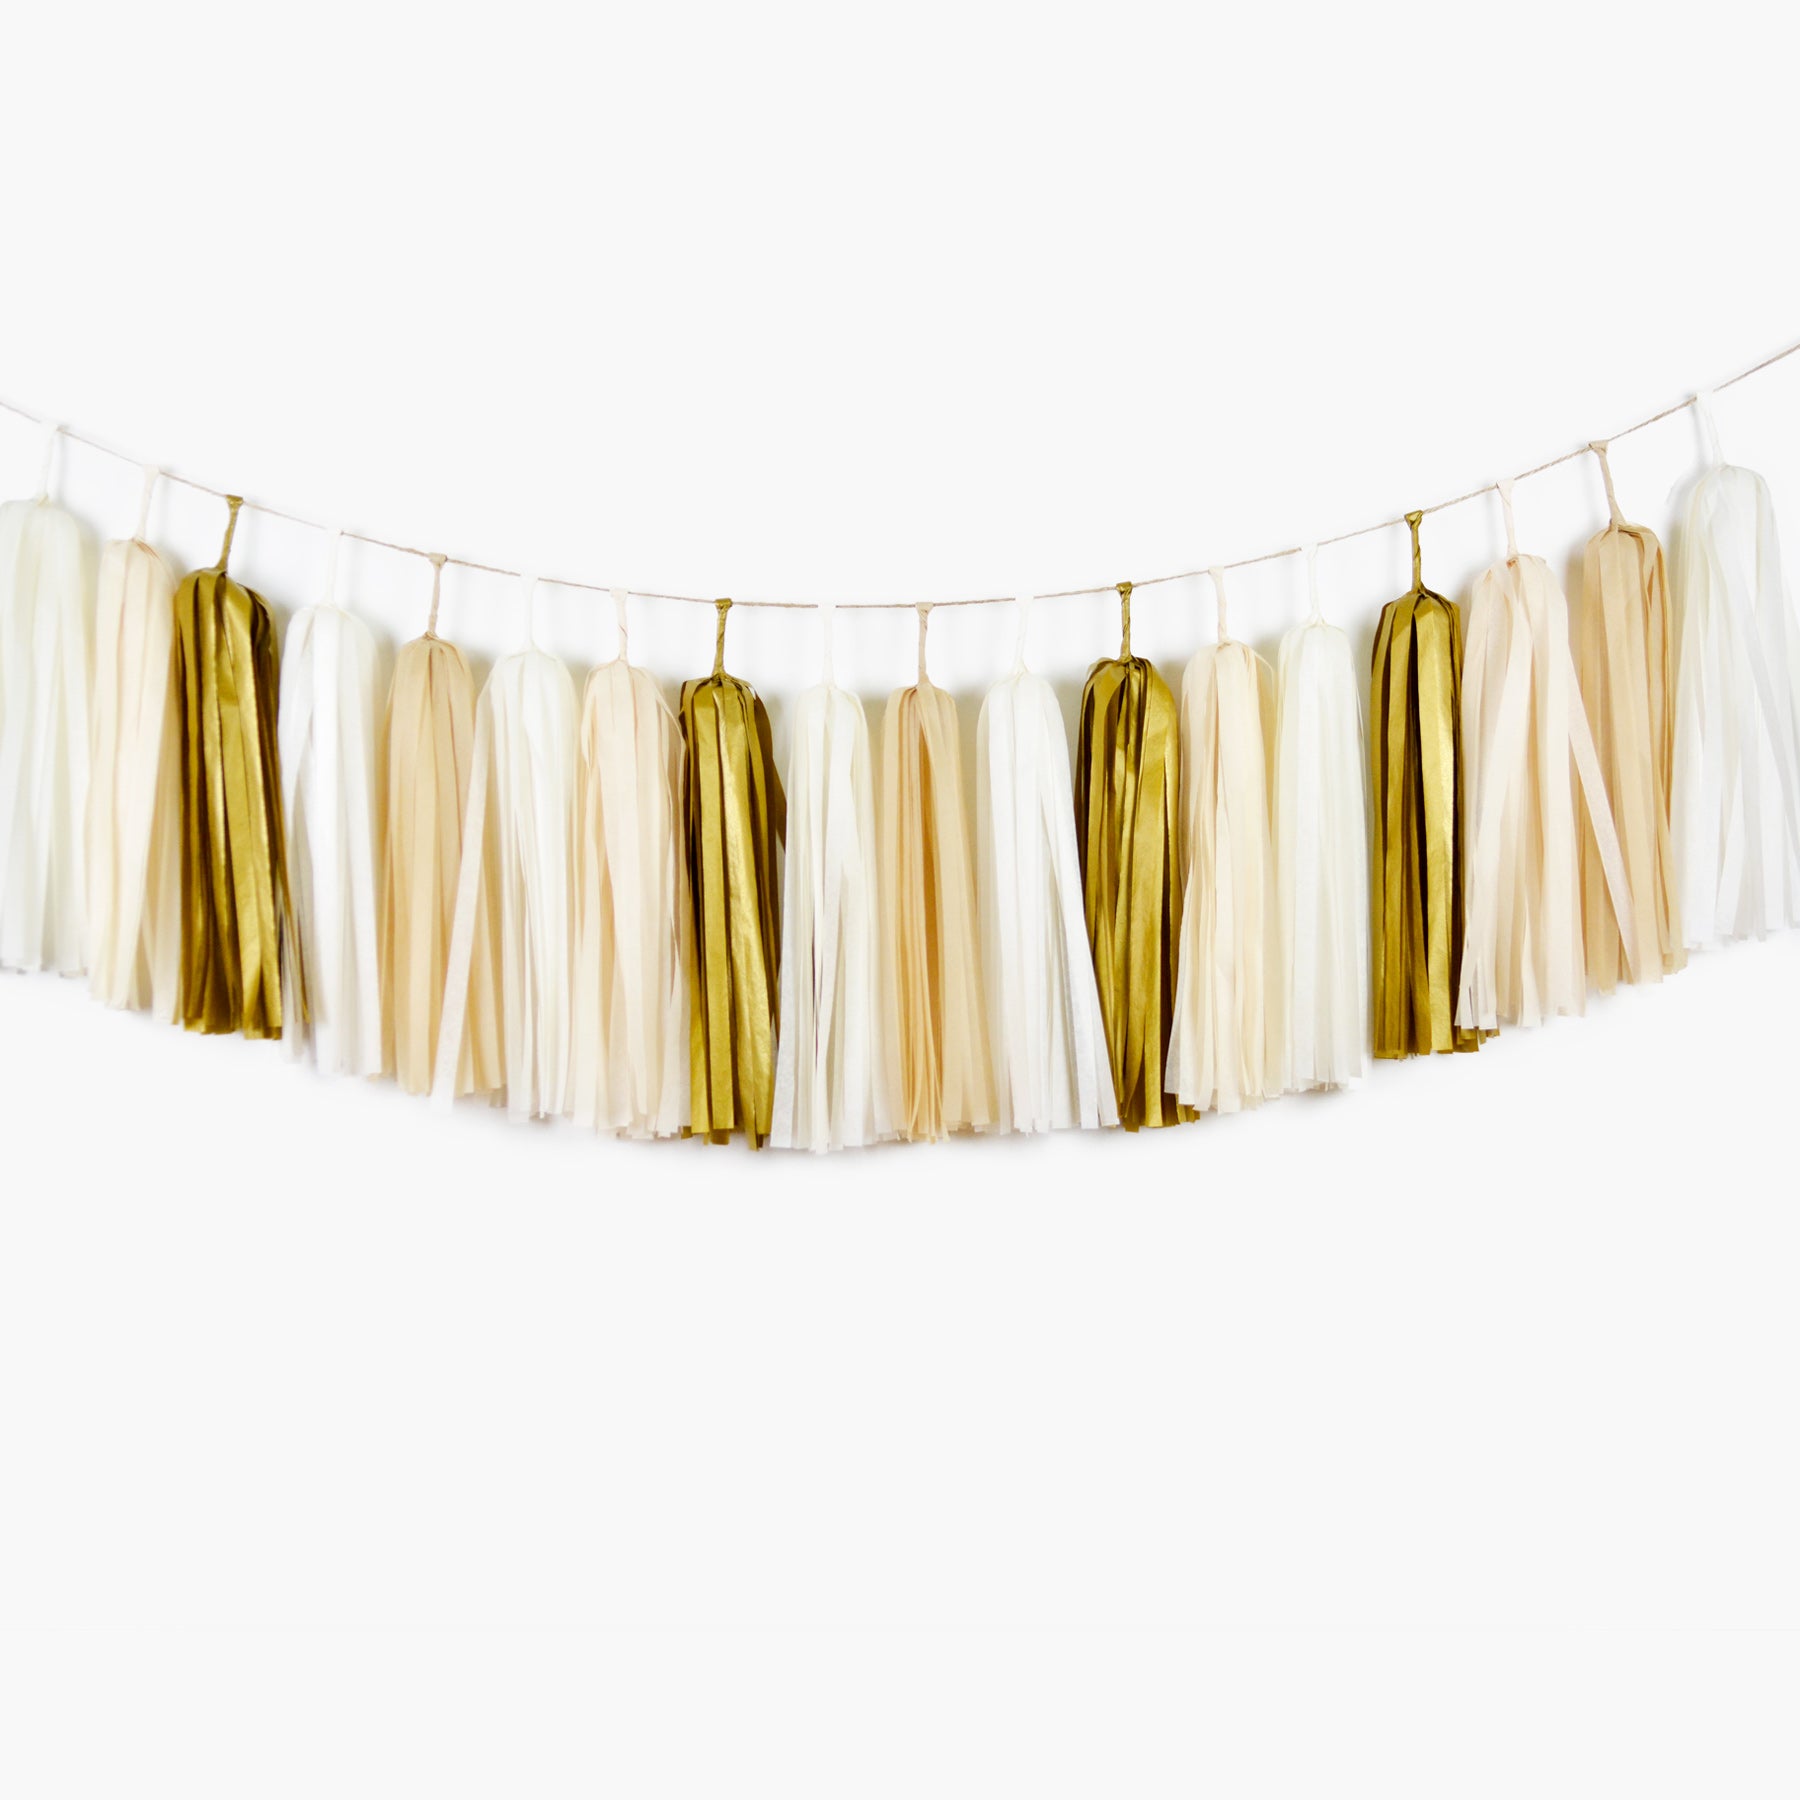 Gold Champagne Tassel Garland - Neutral Color Party Garland, Neutral Nursery Wall Hanging Decoration, Bridal Shower Decoration, Baby Shower Garland